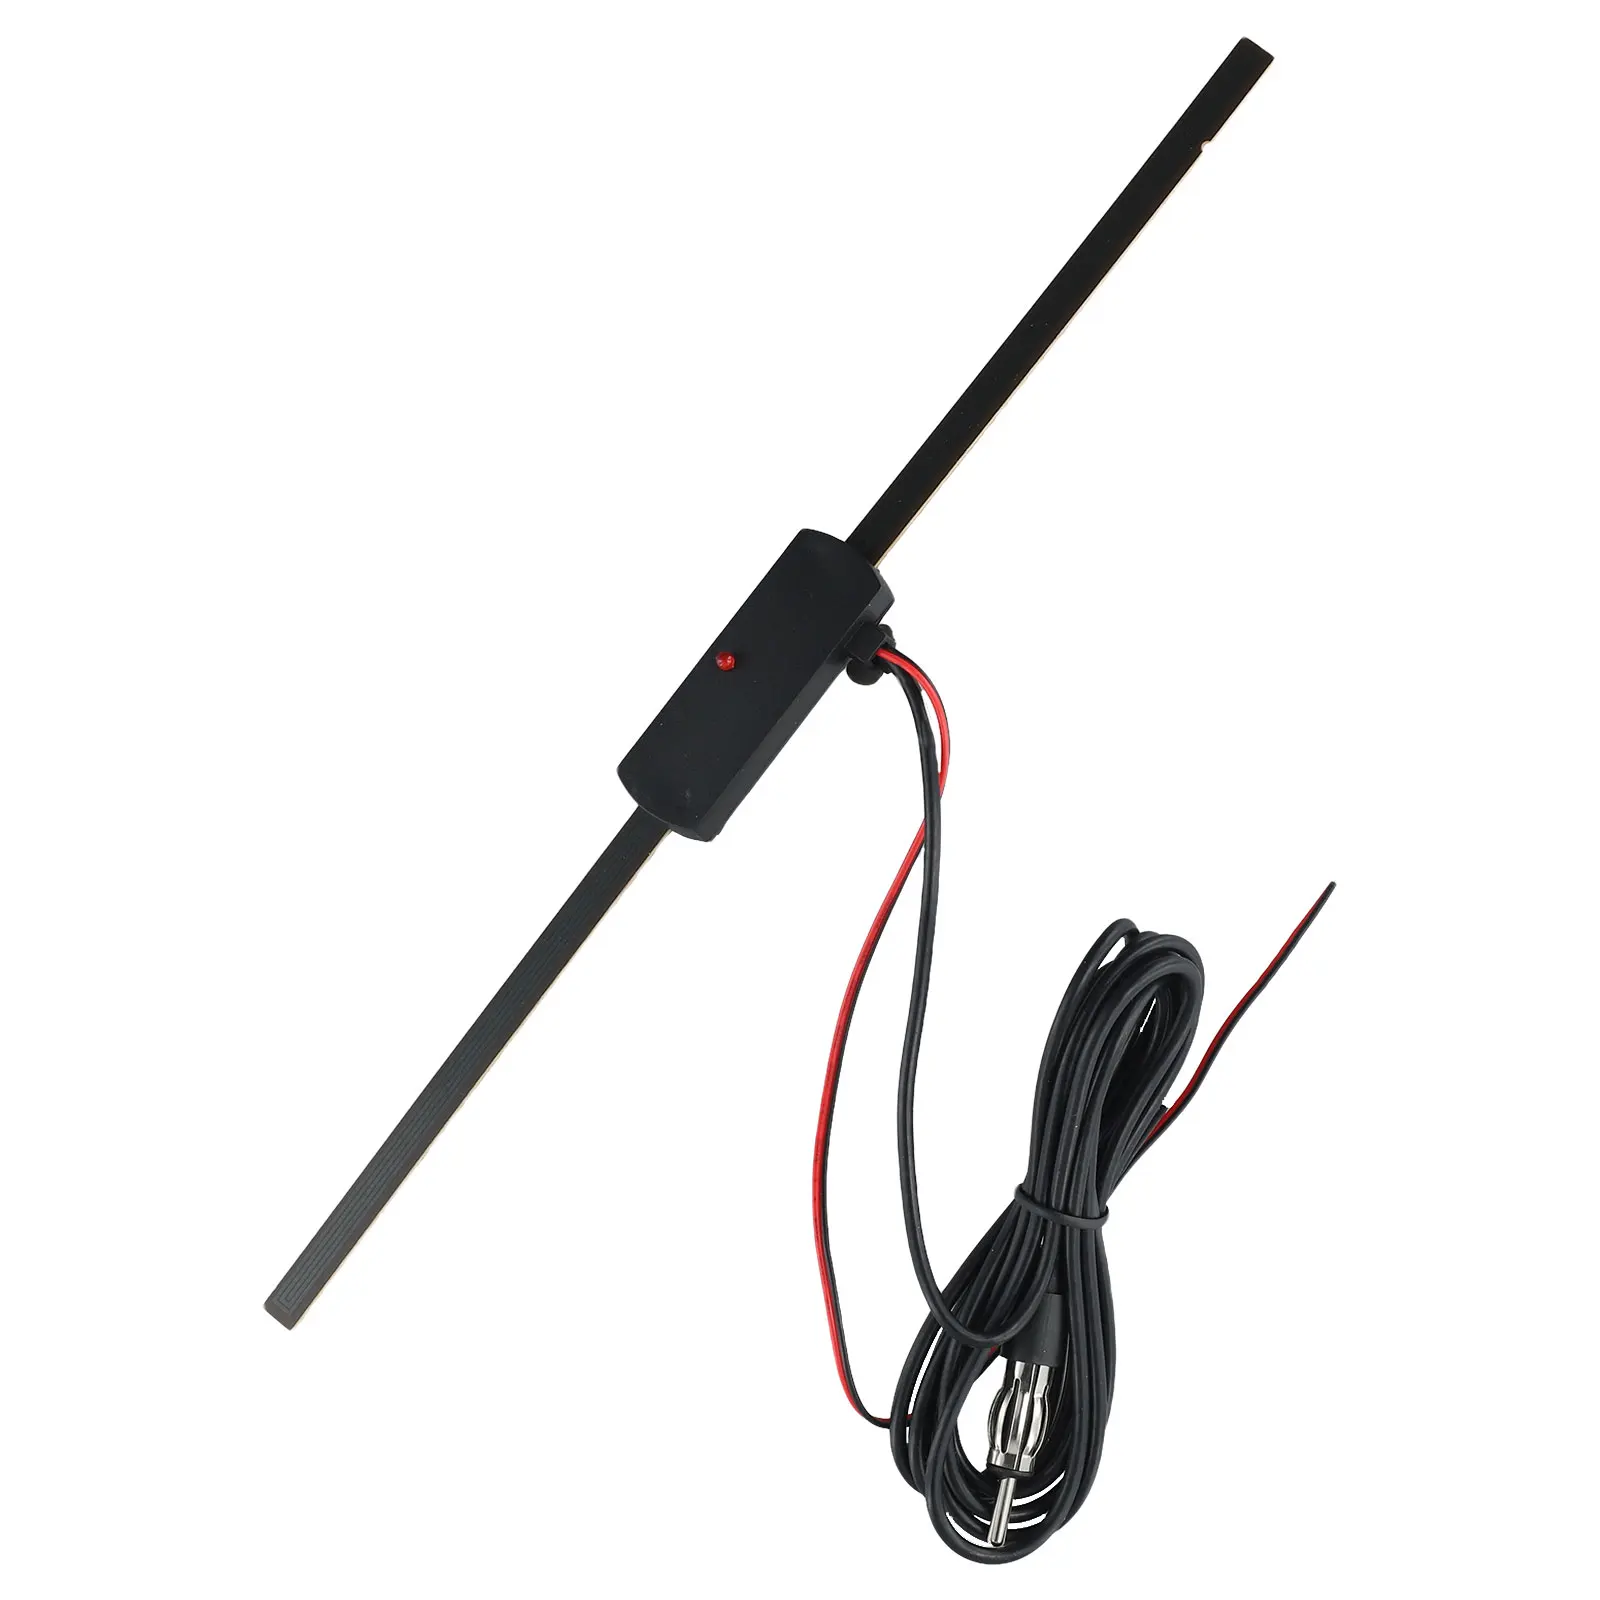 

Universal Practical FM Signal Amplifier Anti-interference Car Antenna Radio Universal FM Booster Amp Automobile Parts